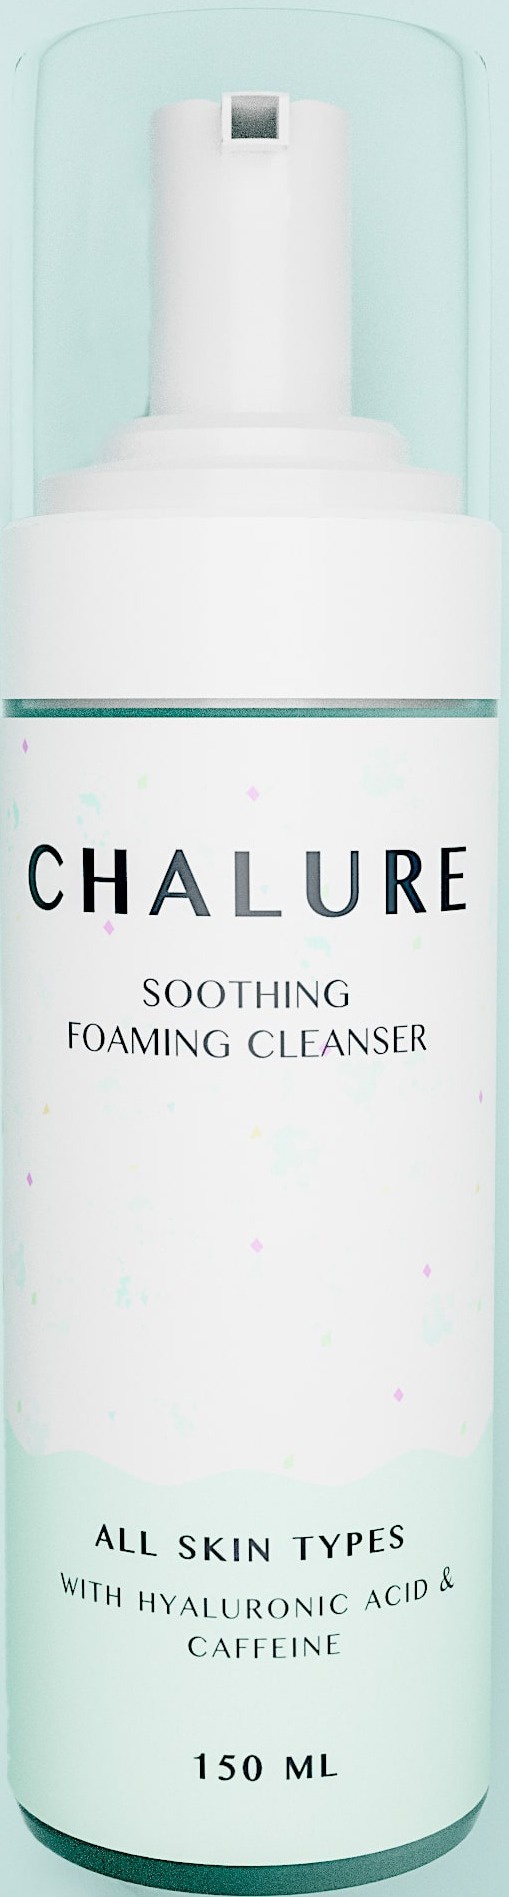 Chalure Soothing Foaming Cleanser With Hyaluronic Acid & Caffeine